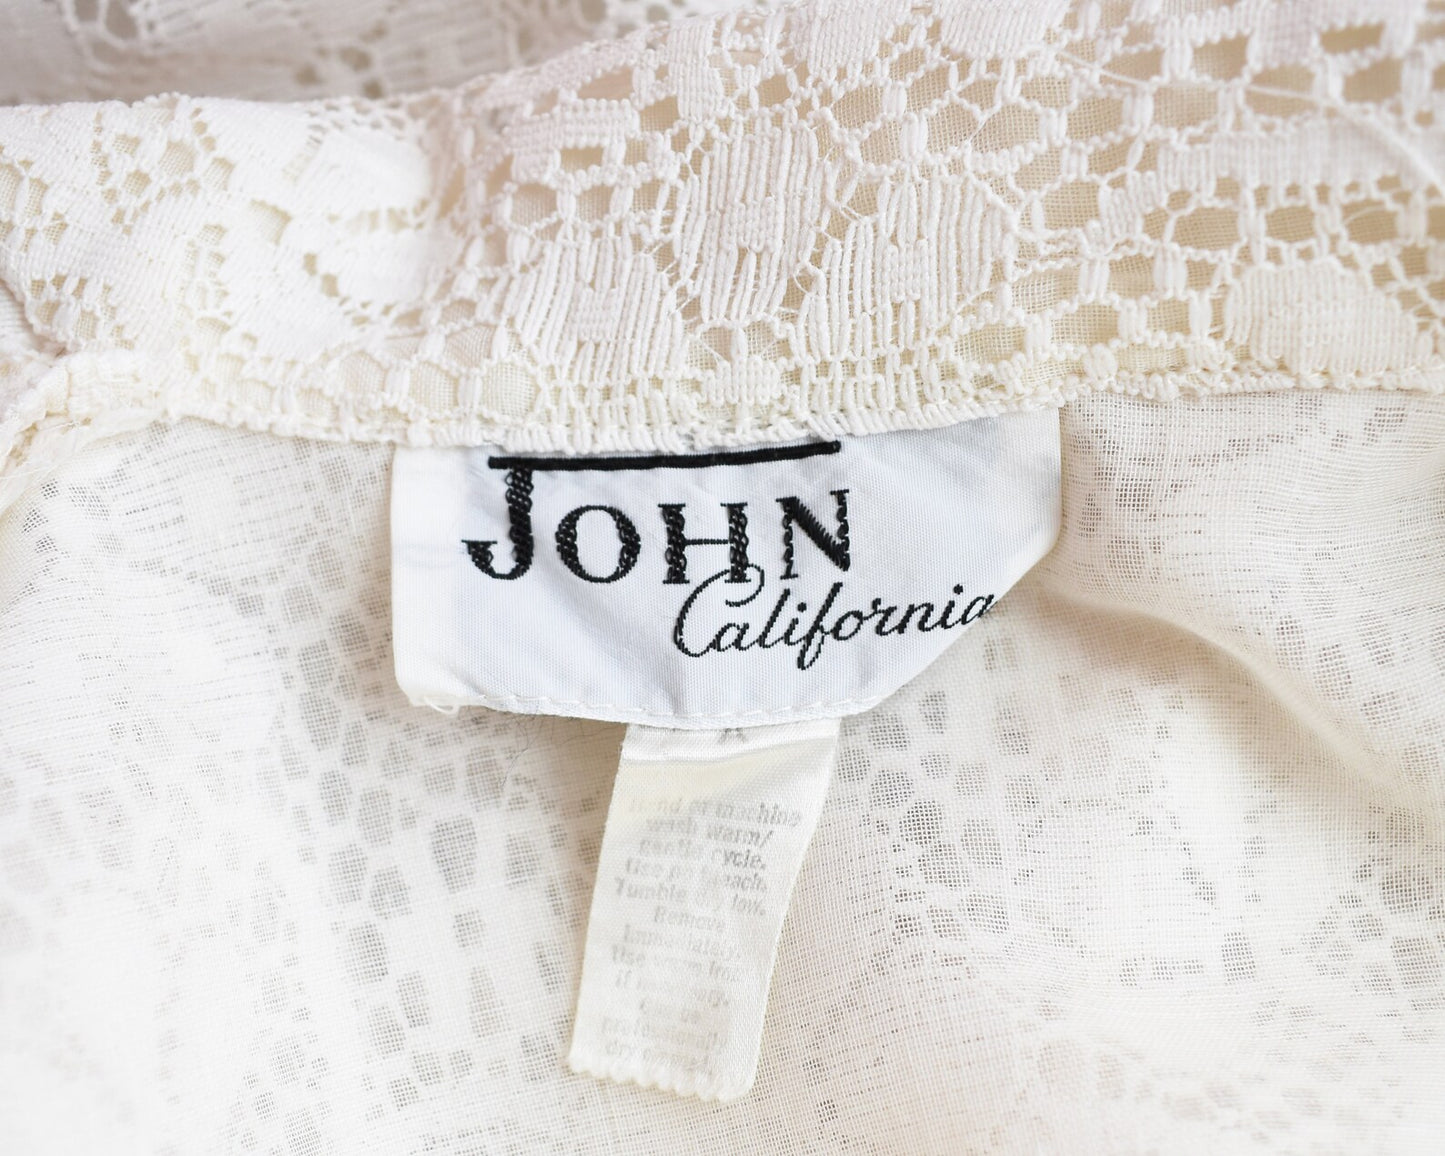 Close up of tag that says John California along with a laundry care tag